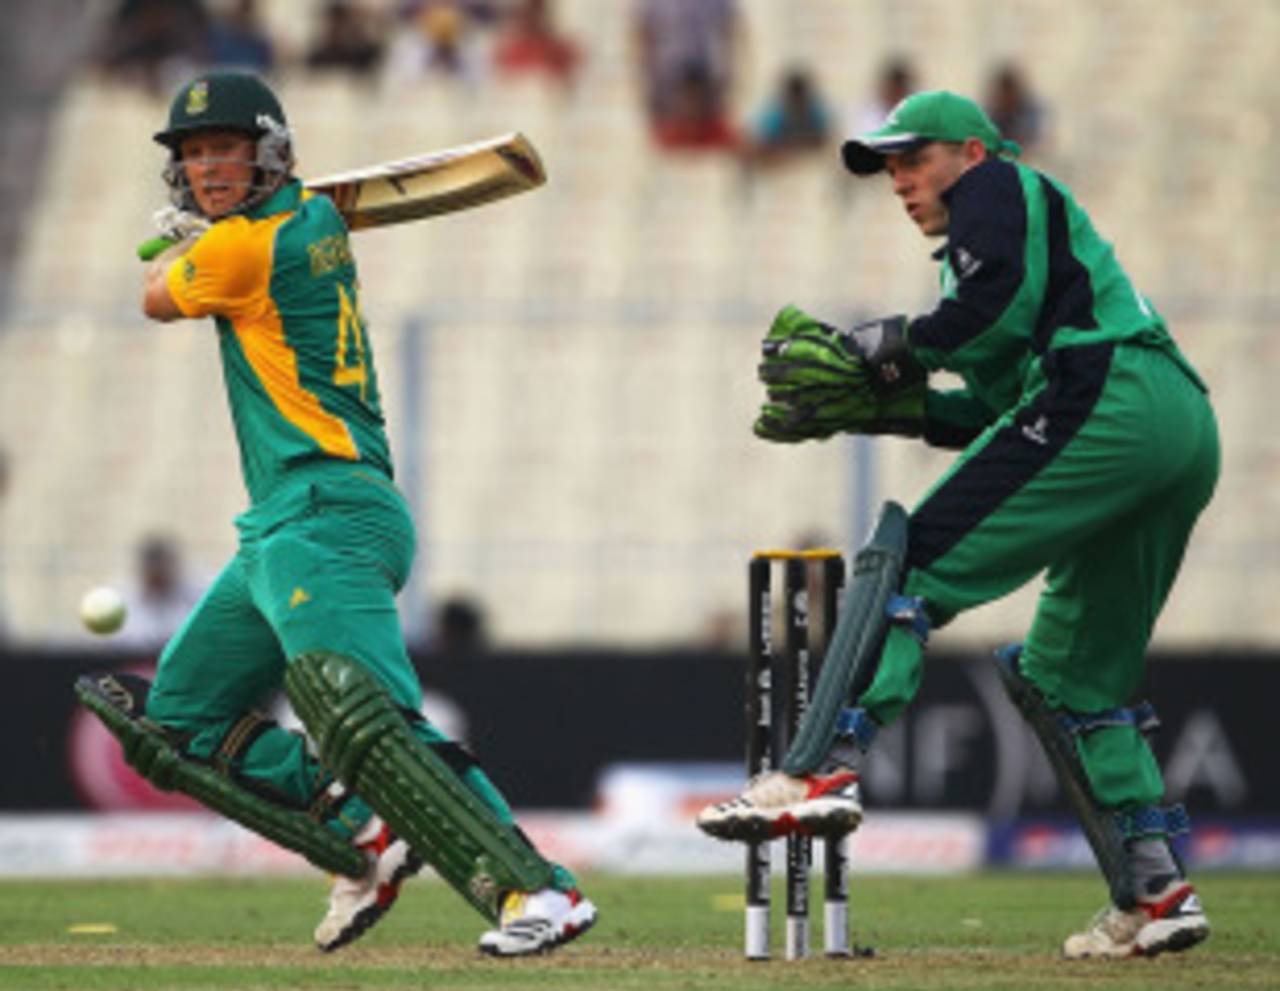 Colin Ingram steadied South Africa with a fluent 46, Ireland v South Africa, Group B, World Cup, Kolkata, March 15, 2011